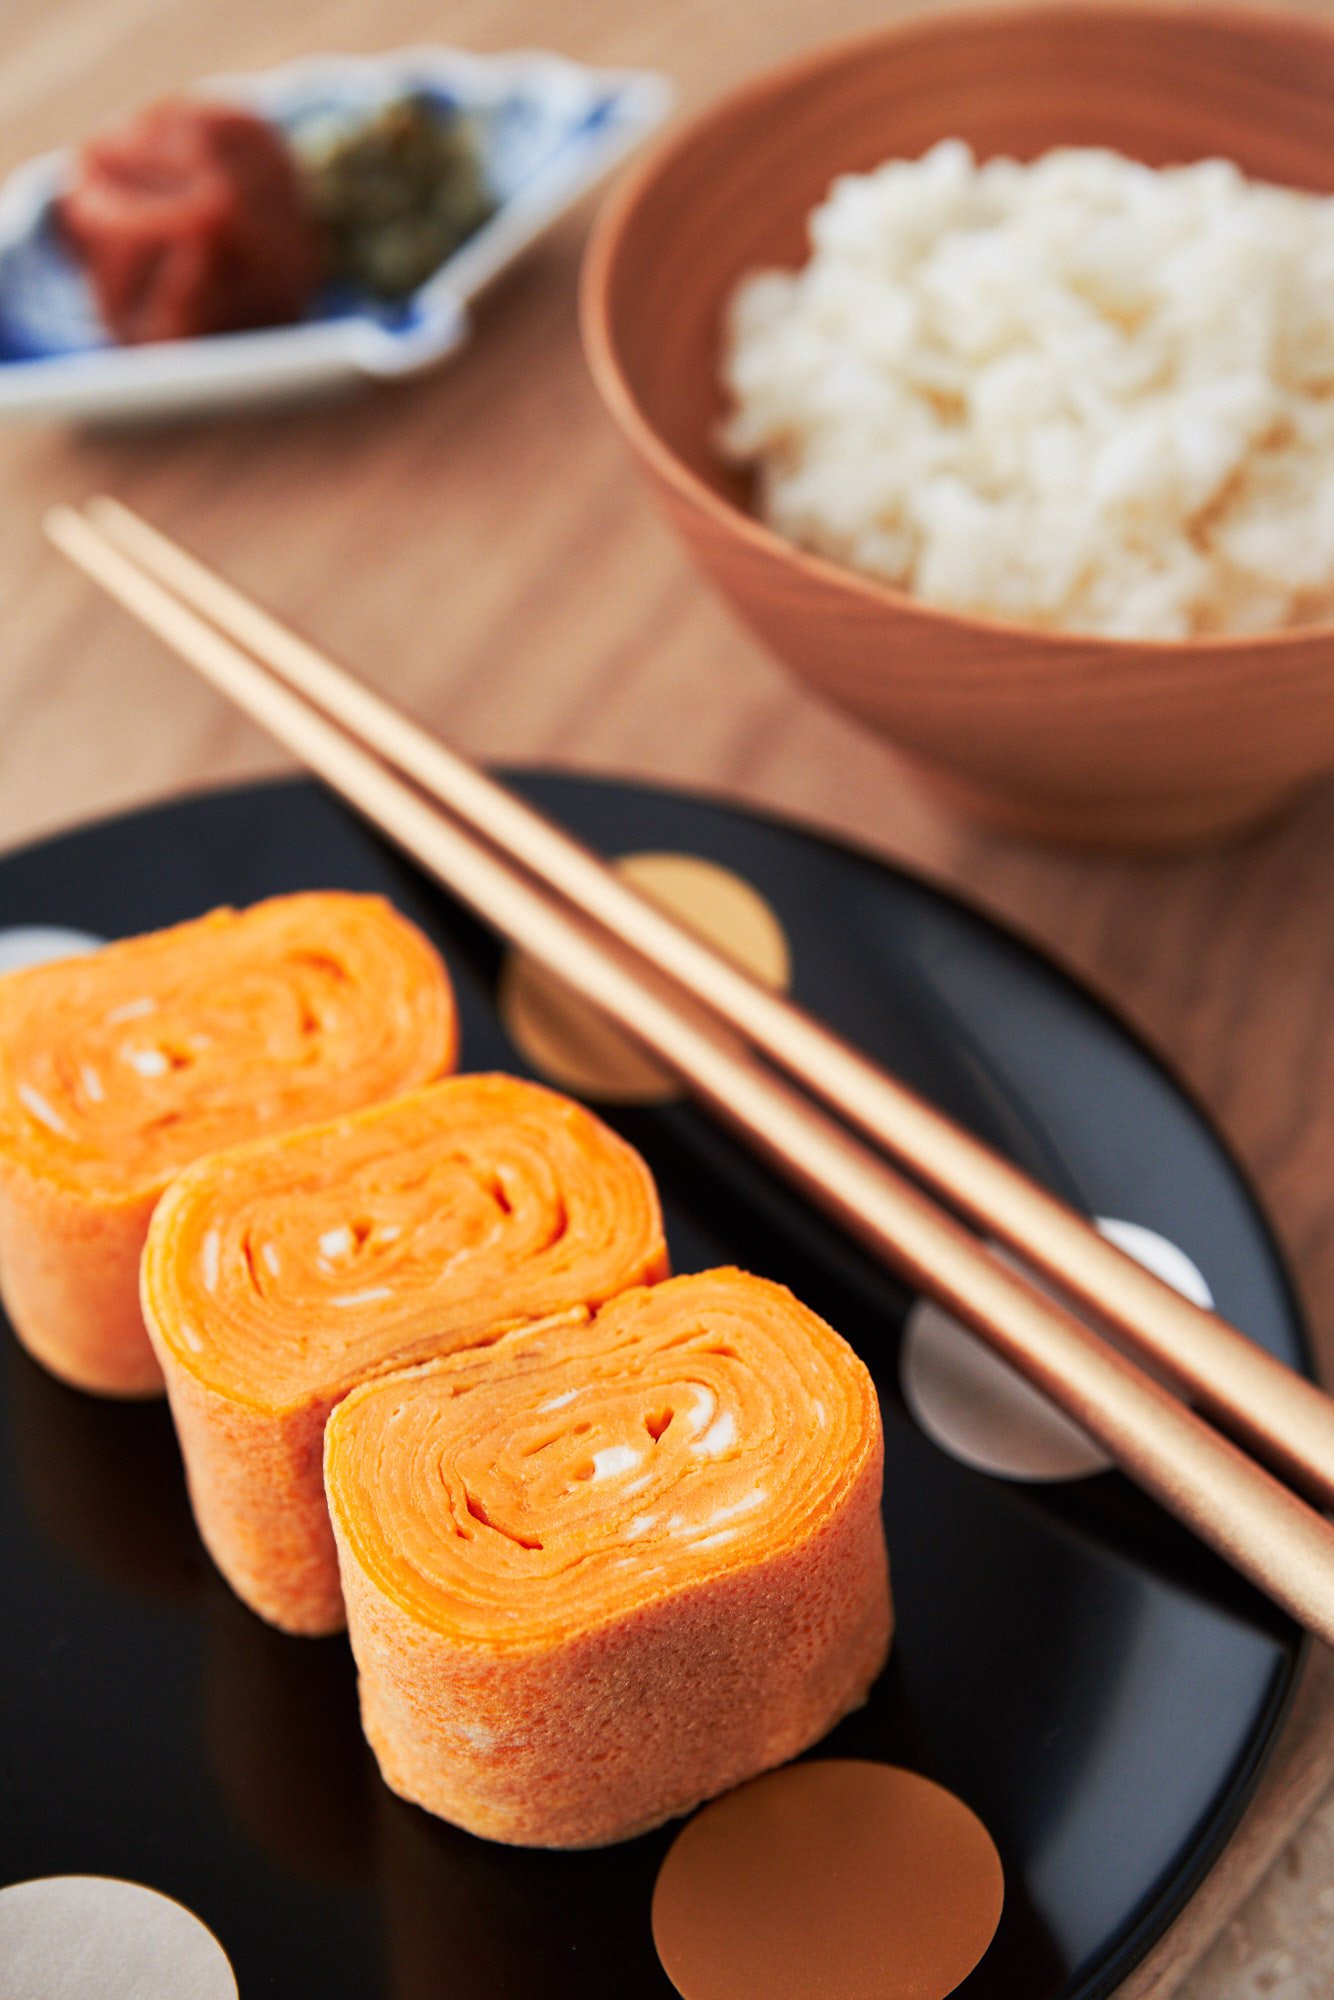 With thin layers of egg rolled into an omelette, Tamagoyaki is a delicious Japanese breakfast dish that also works great into a bento box lunch.